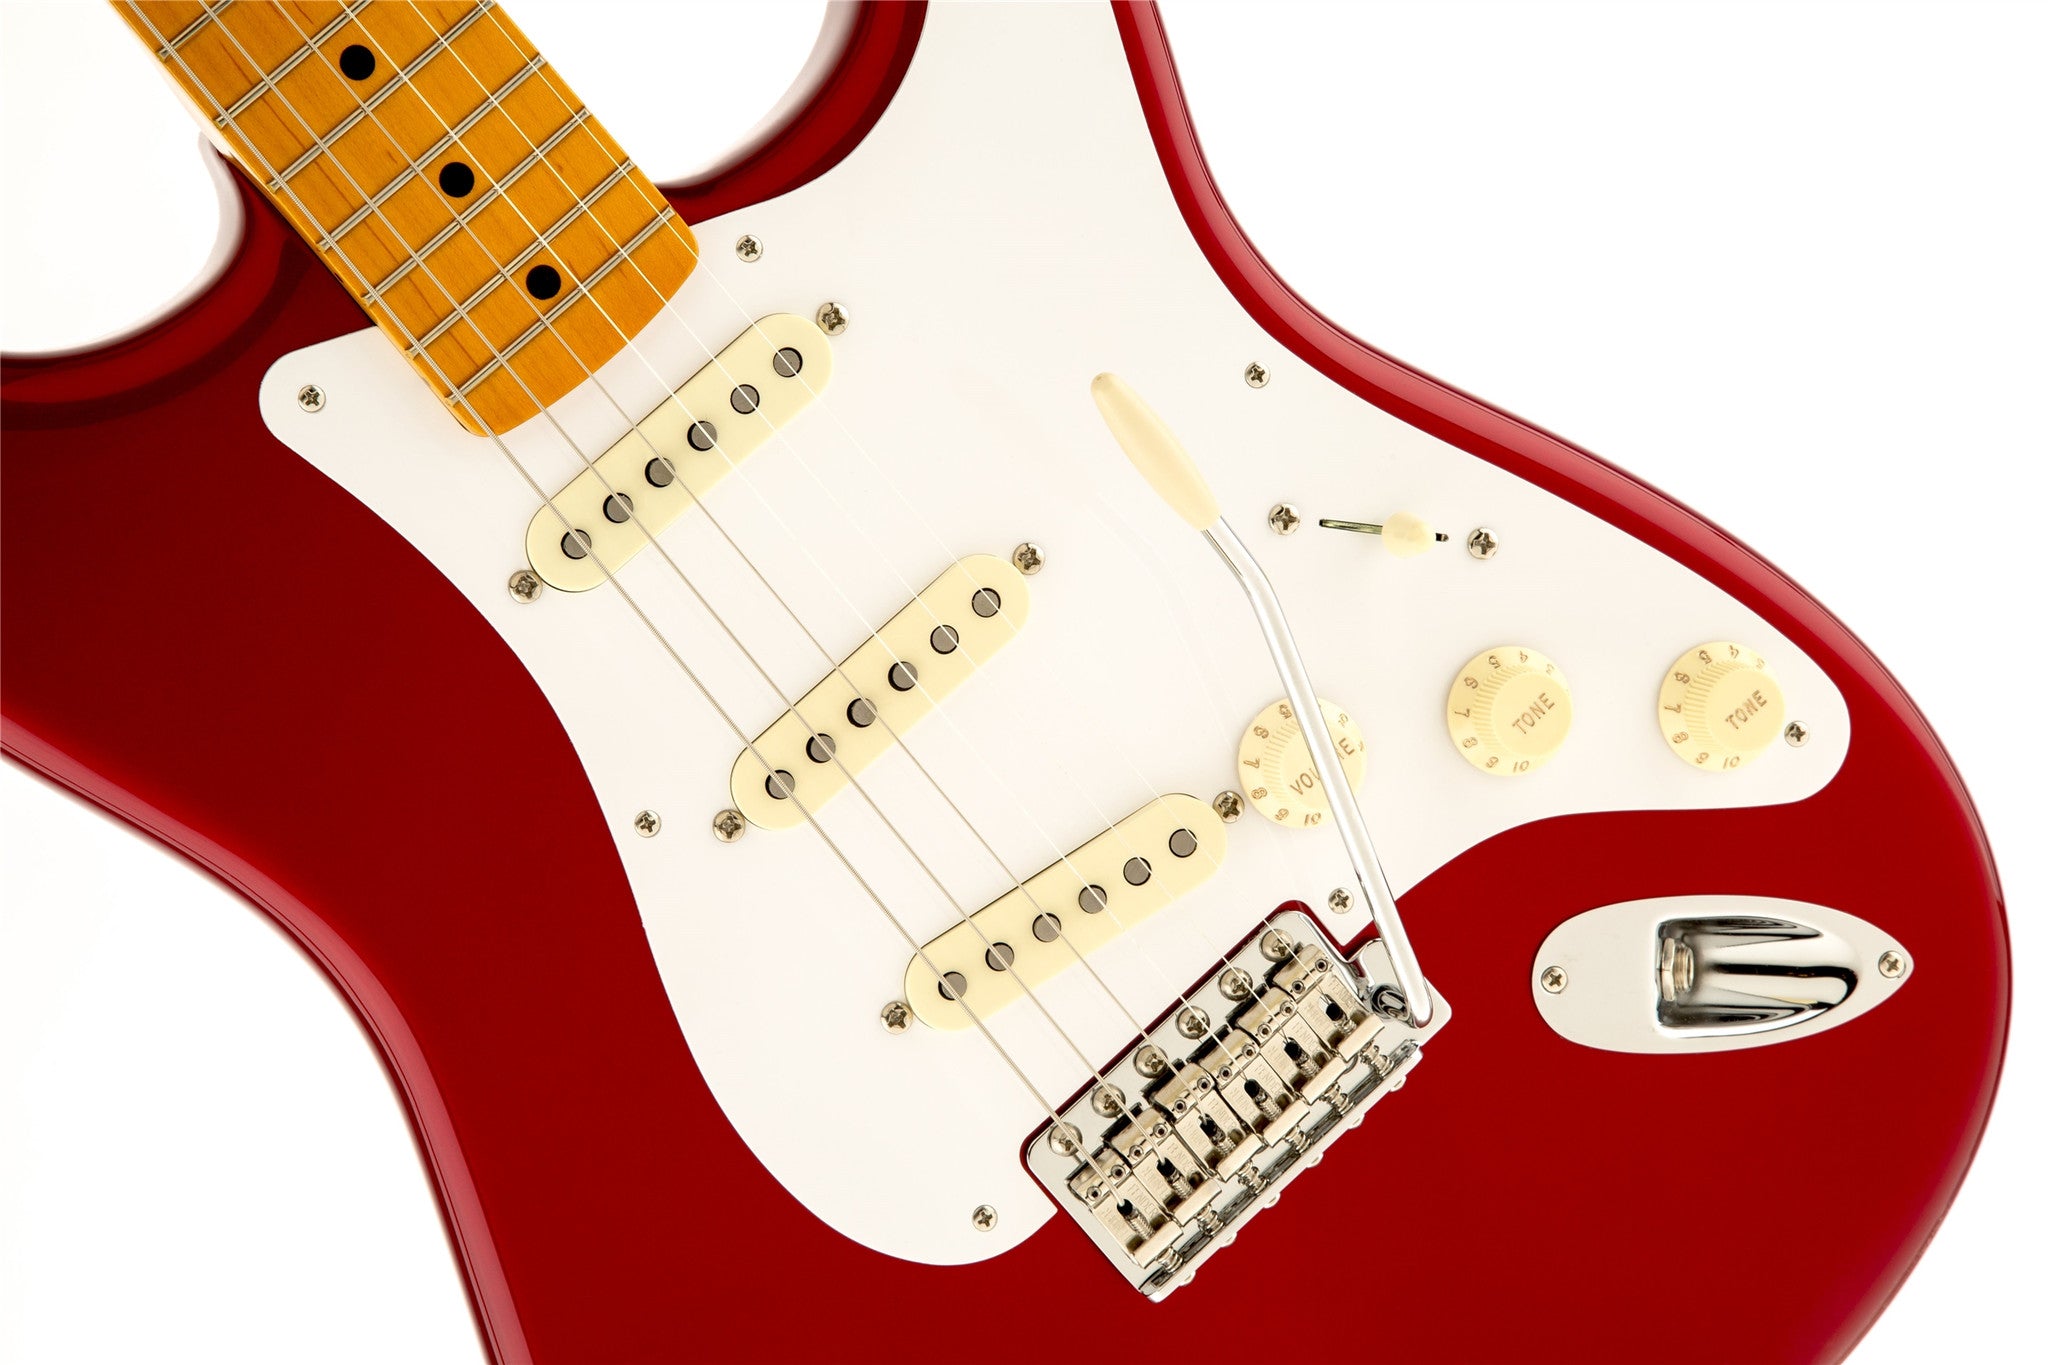 Fender Classic Series '50s Stratocaster® Lacquer, Maple Fingerboard, Candy Apple Red 0140061709 - L.A. Music - Canada's Favourite Music Store!